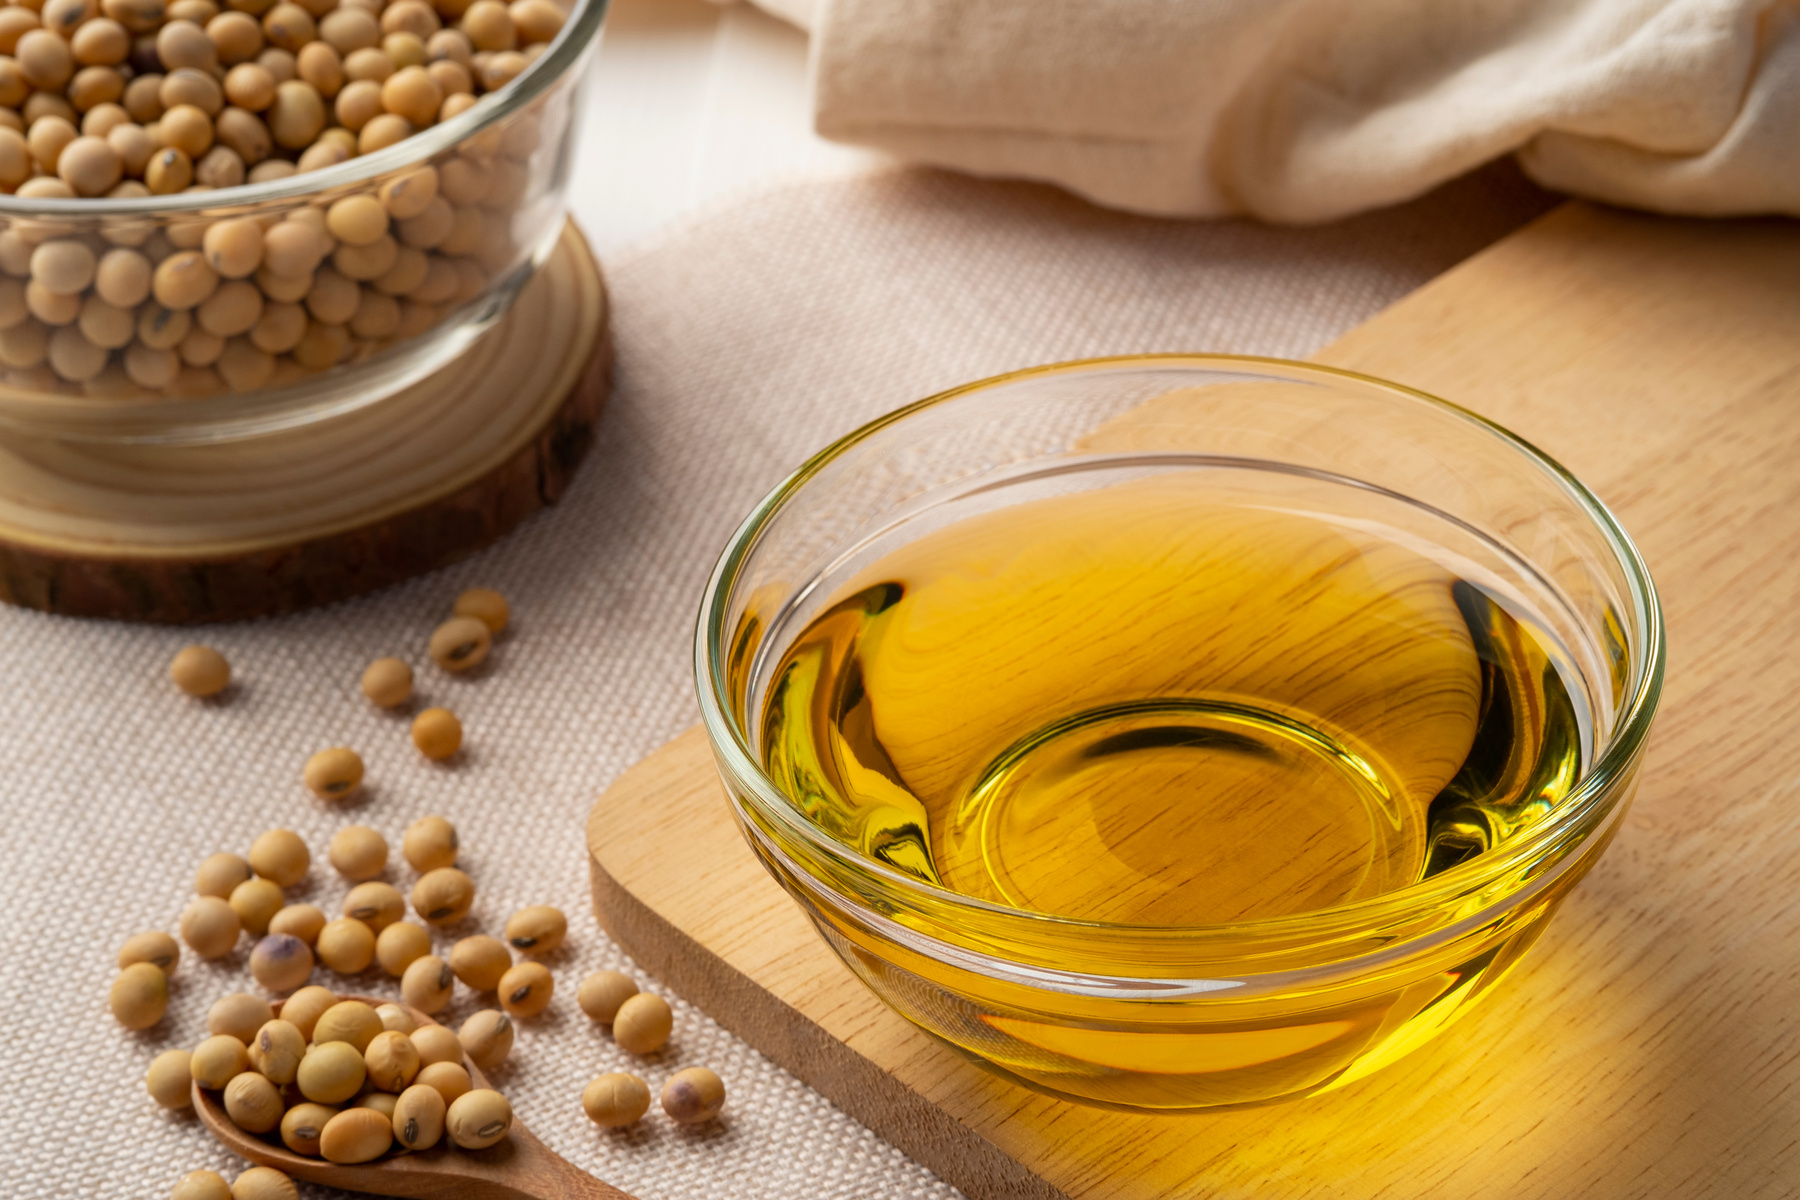 Soybean oil,is a vegetable oil extracted from the seeds of the soybean,in glass bowl on wooden table